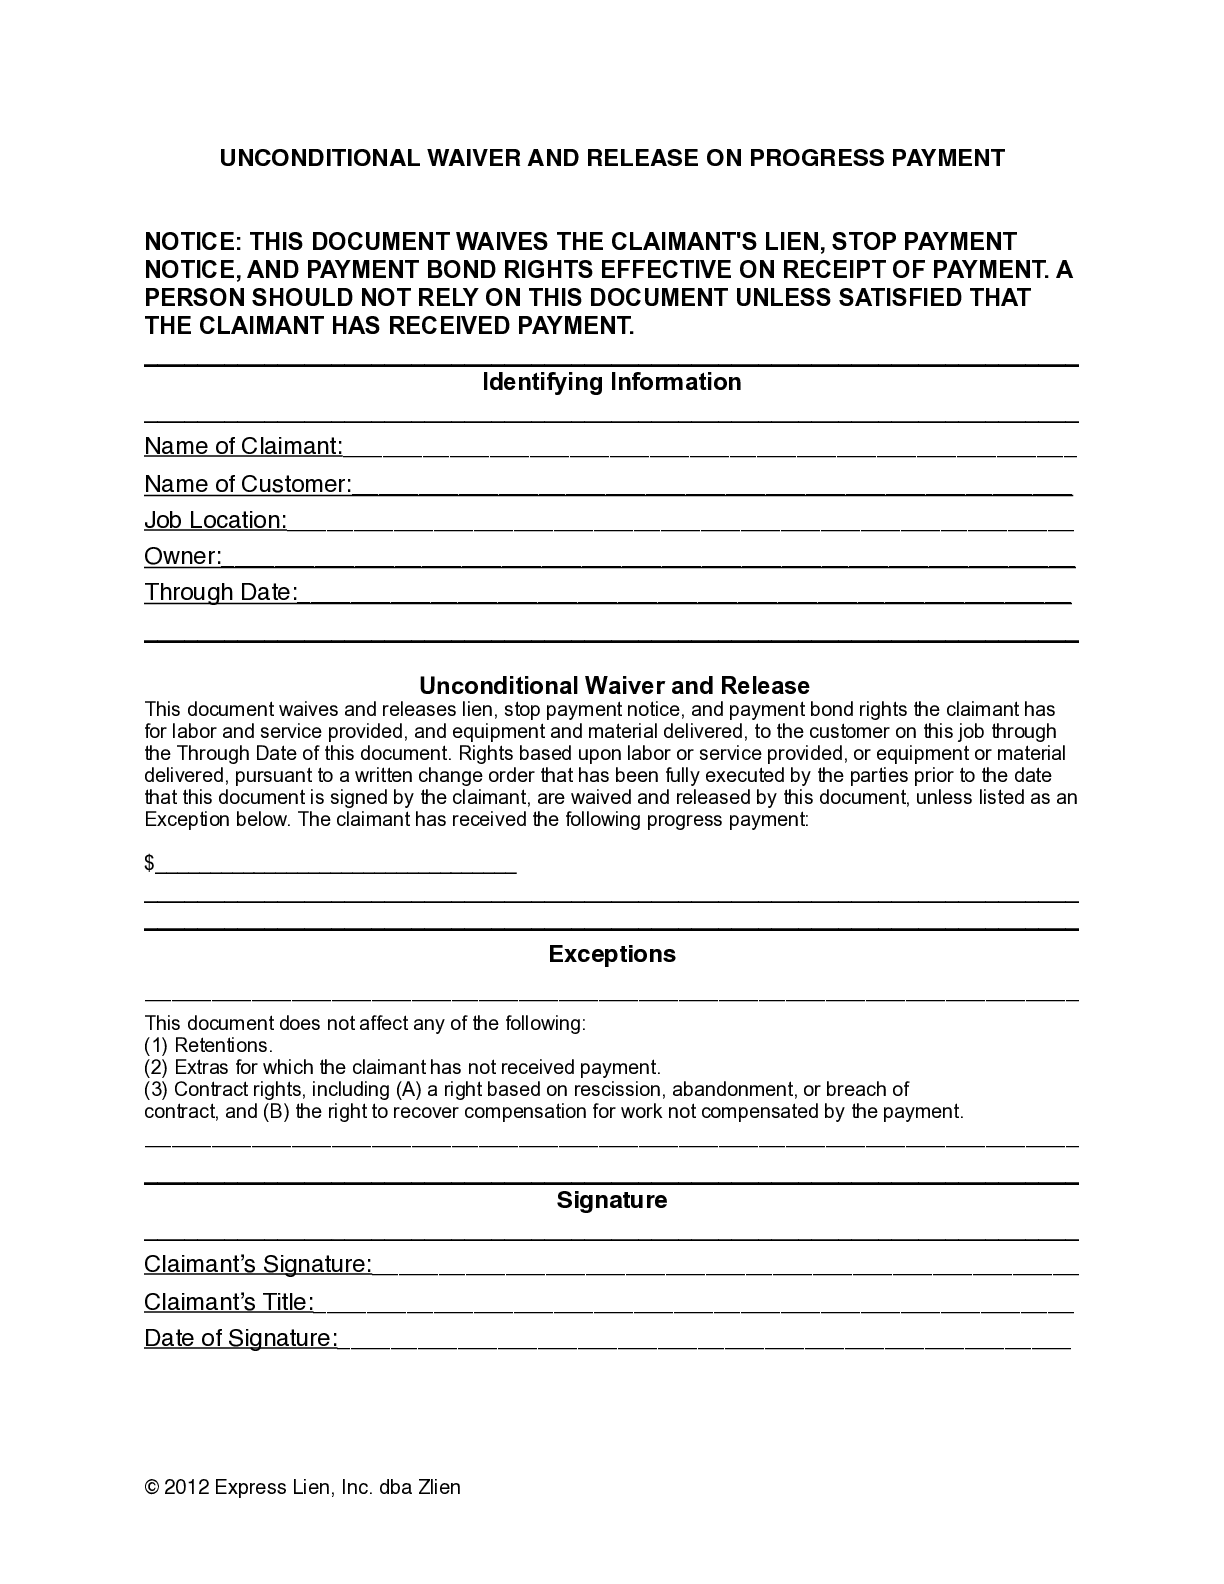 Kansas Partial Unconditional Lien Waiver Form - free from